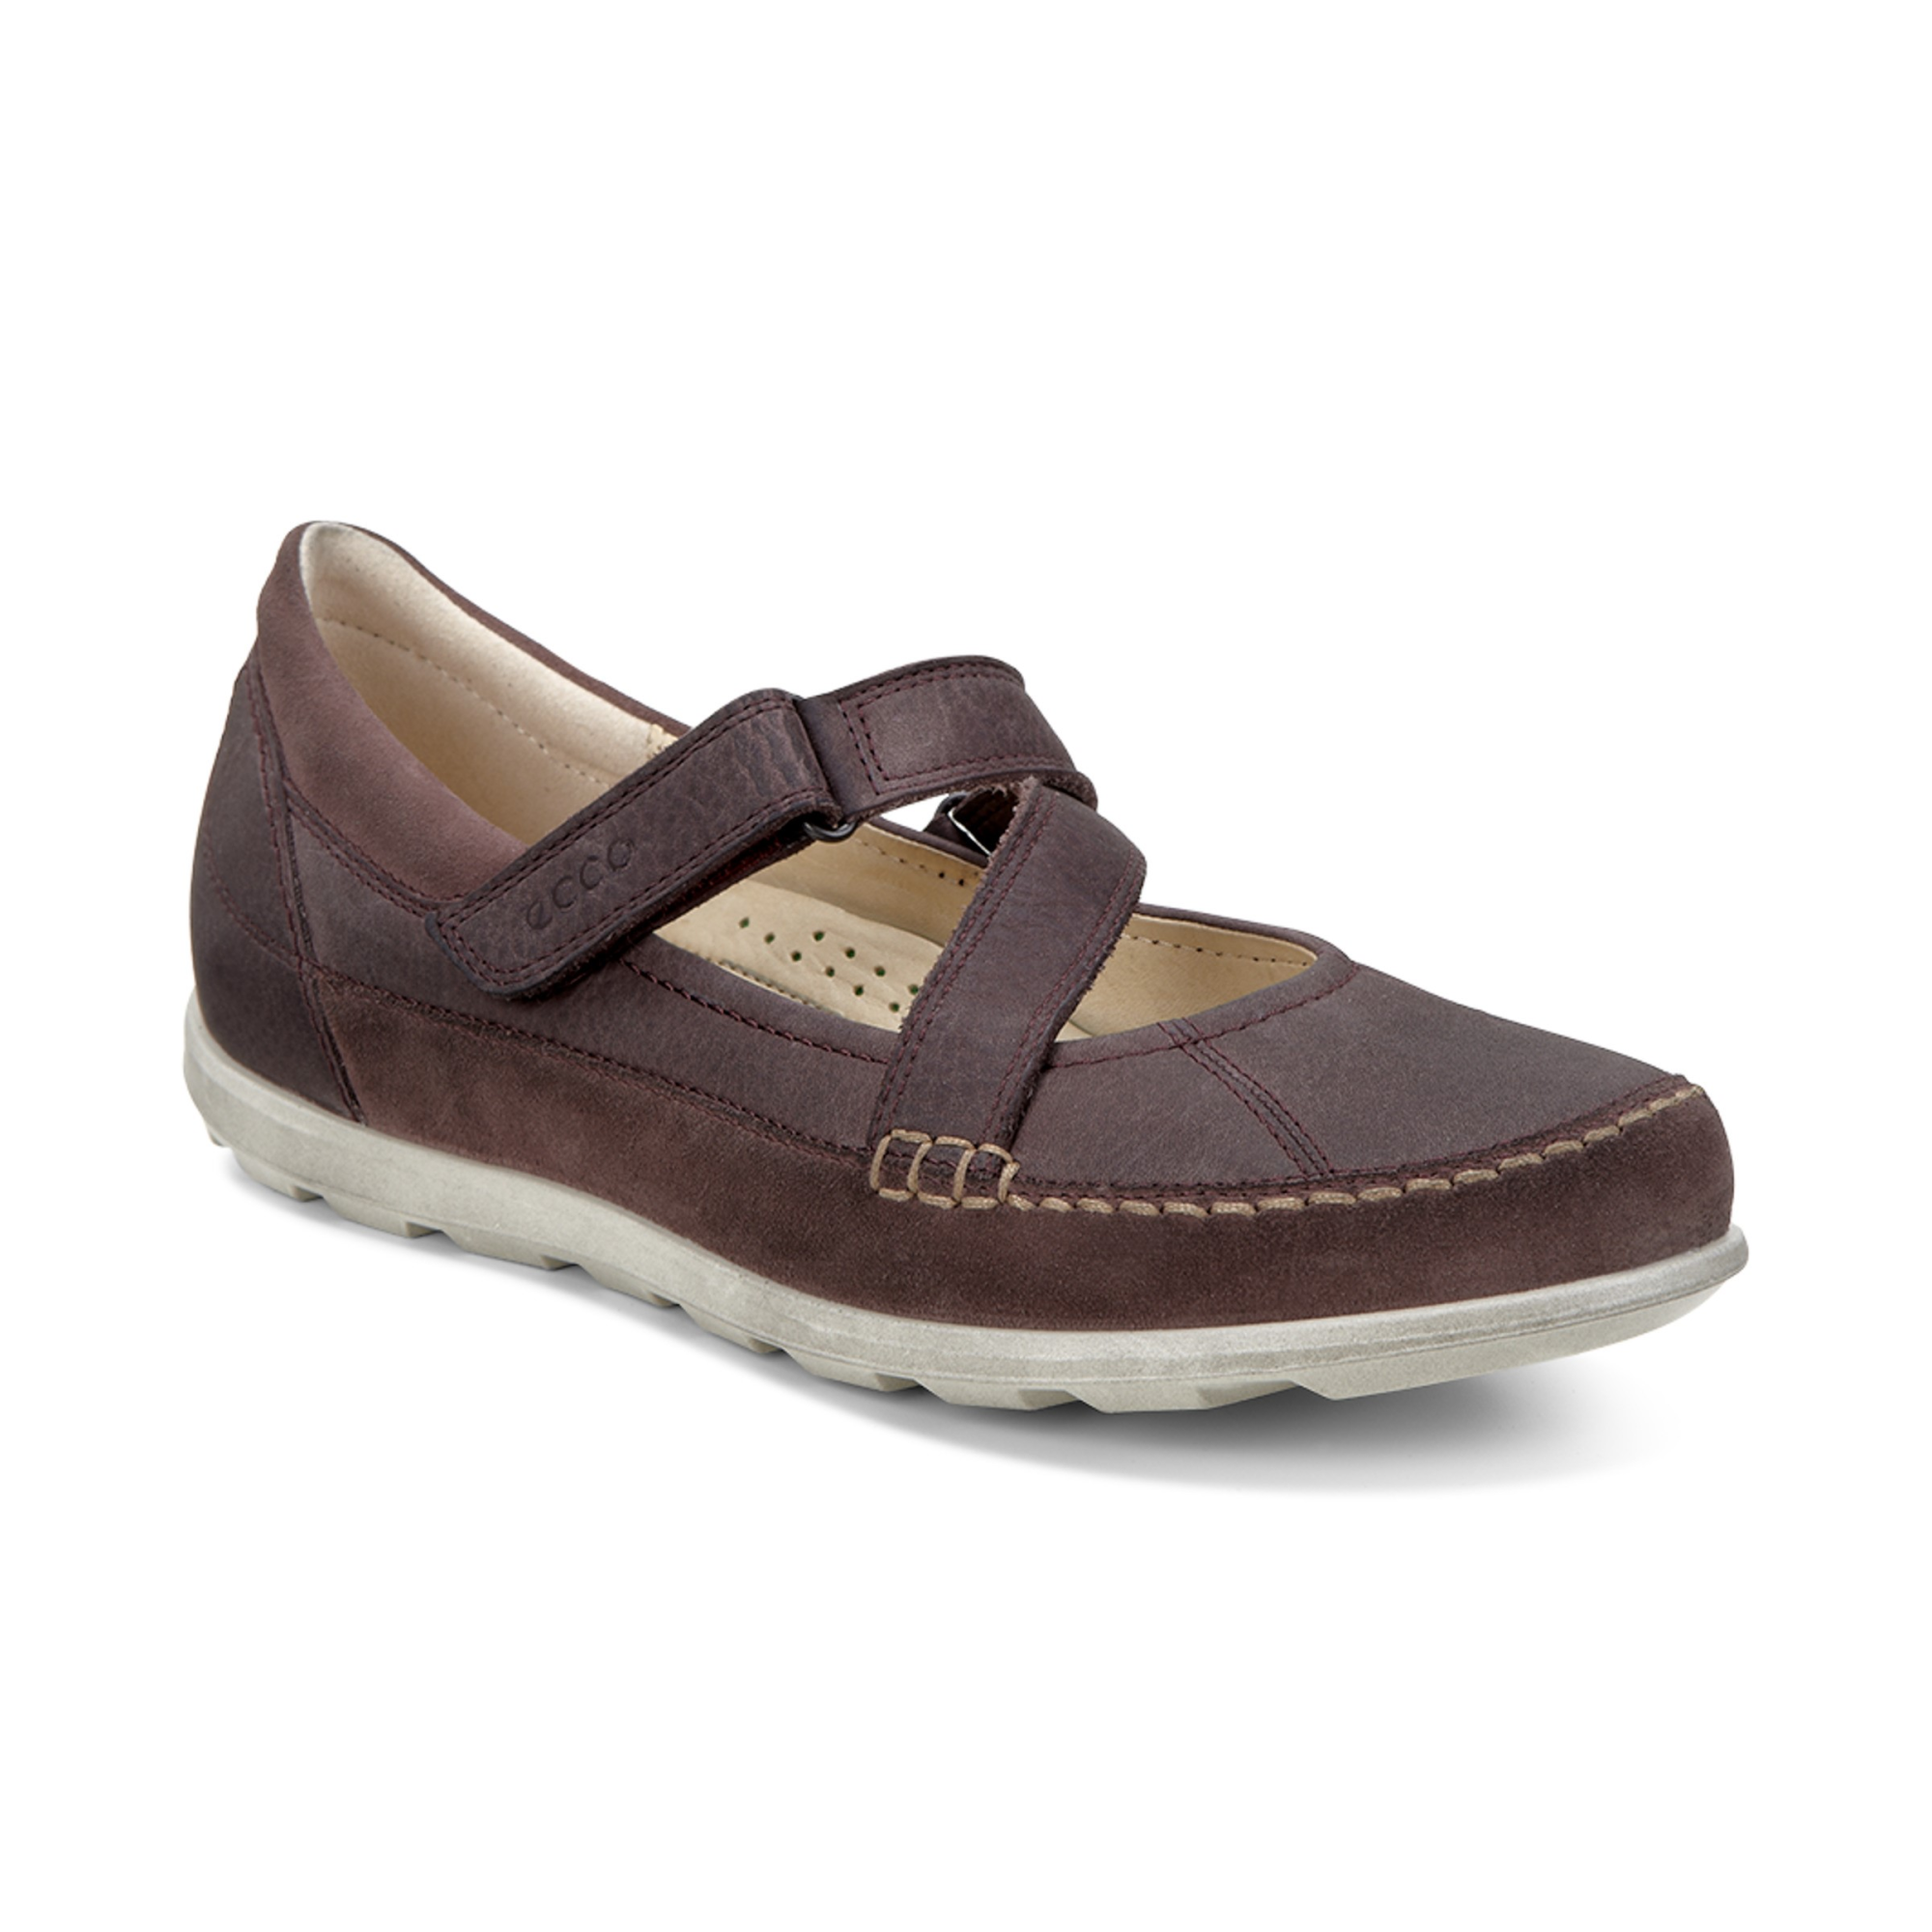 Ecco Cayla Mary Jane 35 - Products - Veryk Mall - Veryk Mall, many product, quick response, your money!